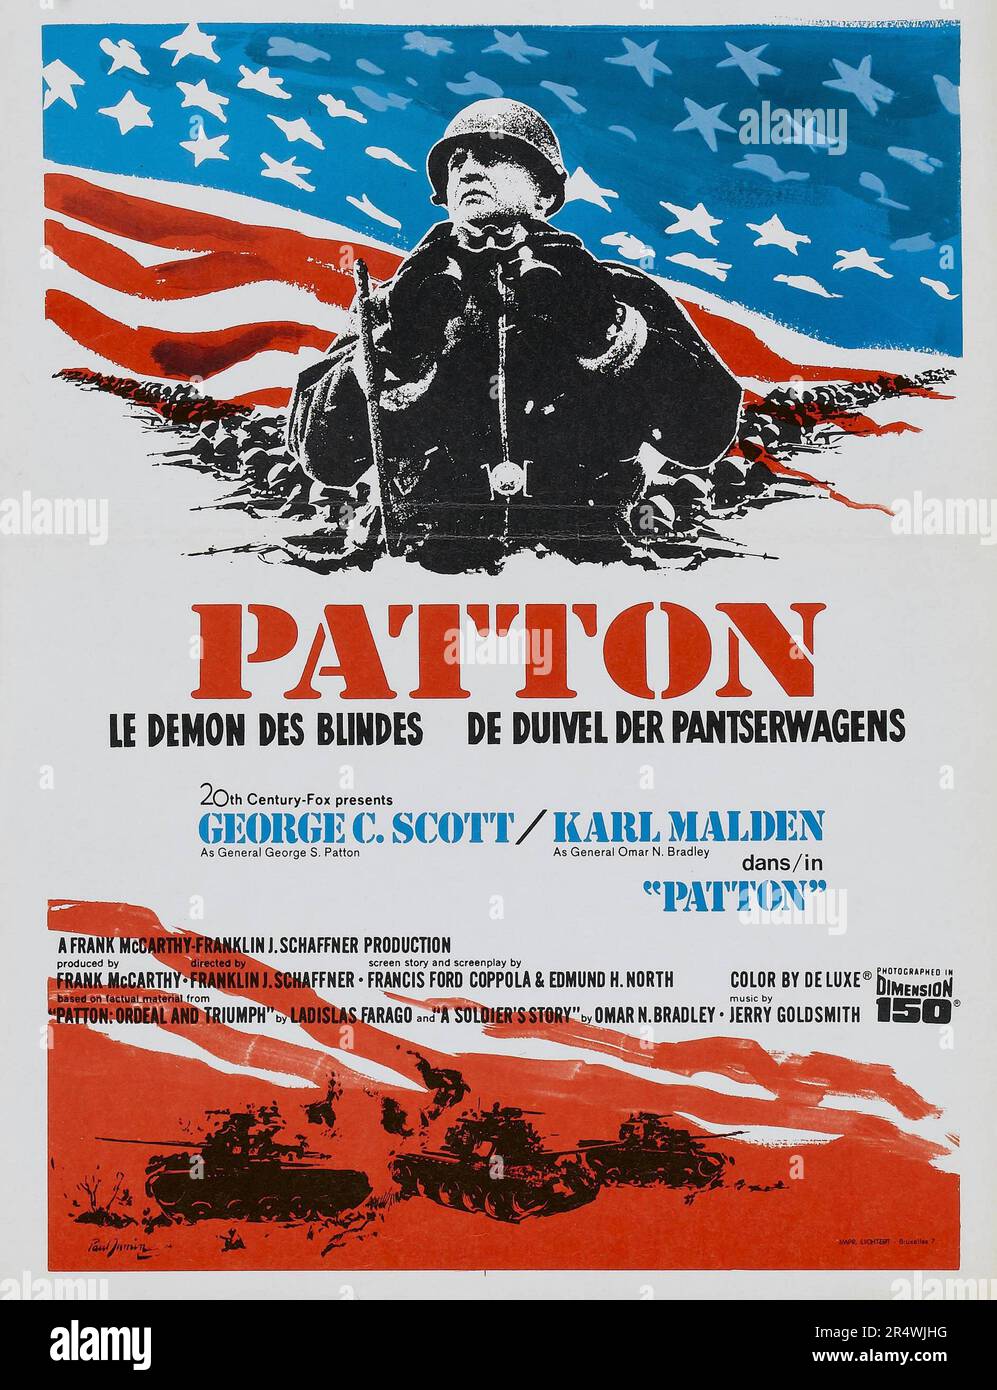 Poster for Patton - a 1970 American biographical war film about US General George Patton during WWII. Starring George Scott and Karl Malden it was directed by Frank Schaffner and based on Patton: Ordeal and Triumph by Ladislas Farago and A Soldier's Story by Omar Bradley. Stock Photo